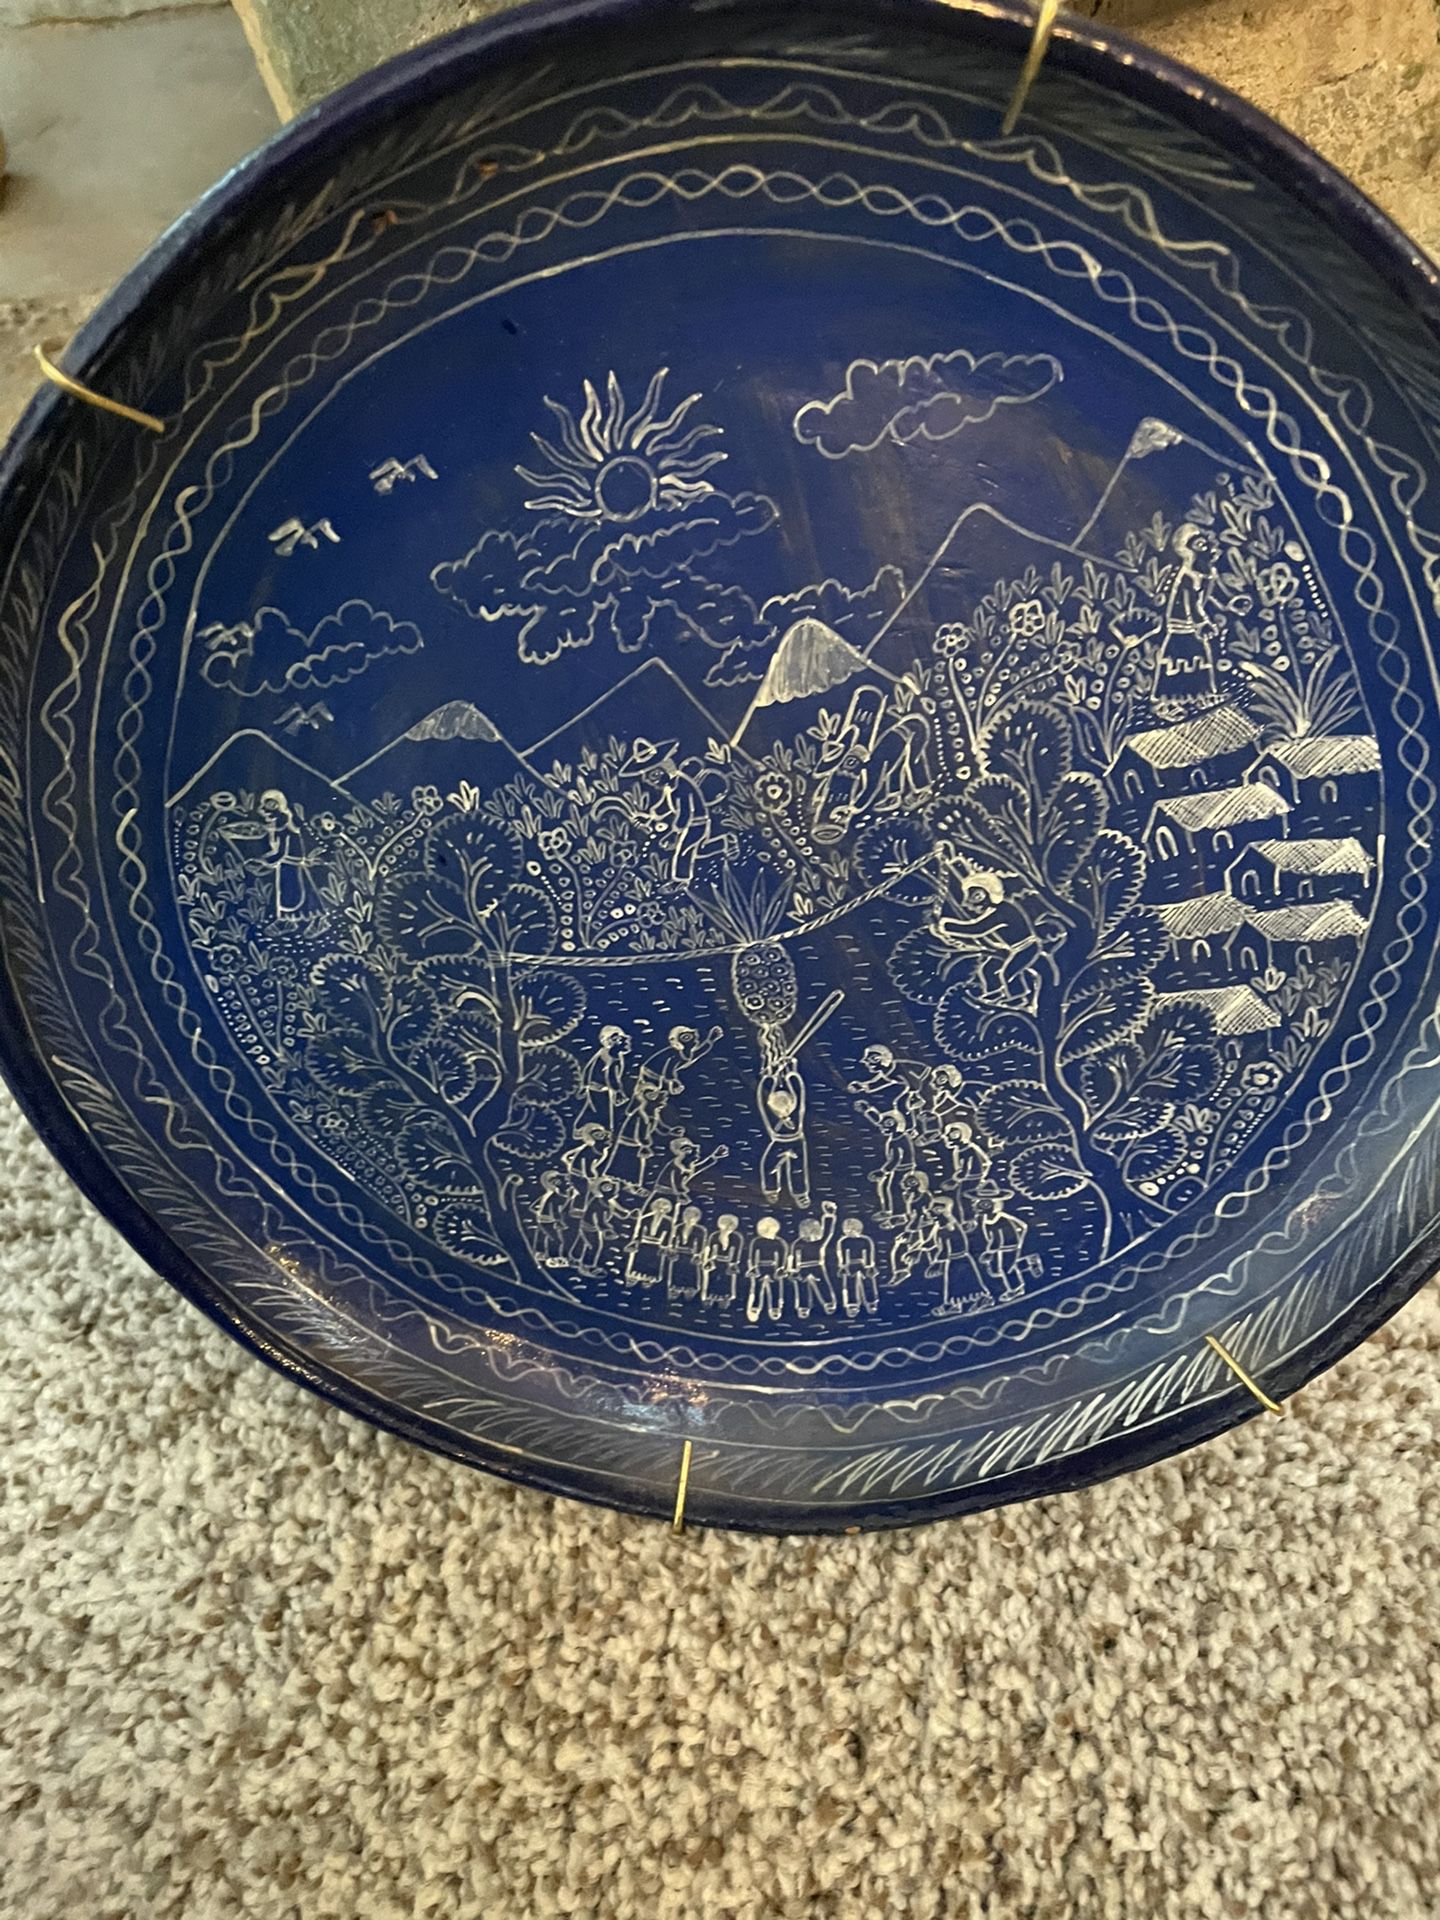 3 Me3 Mexican Village Plates. Ceramic.Depicts A Cockfight , Piñata and Pole Climbing for A Prize . Very Finely Detailed. $30.00 each Sold As Set Only